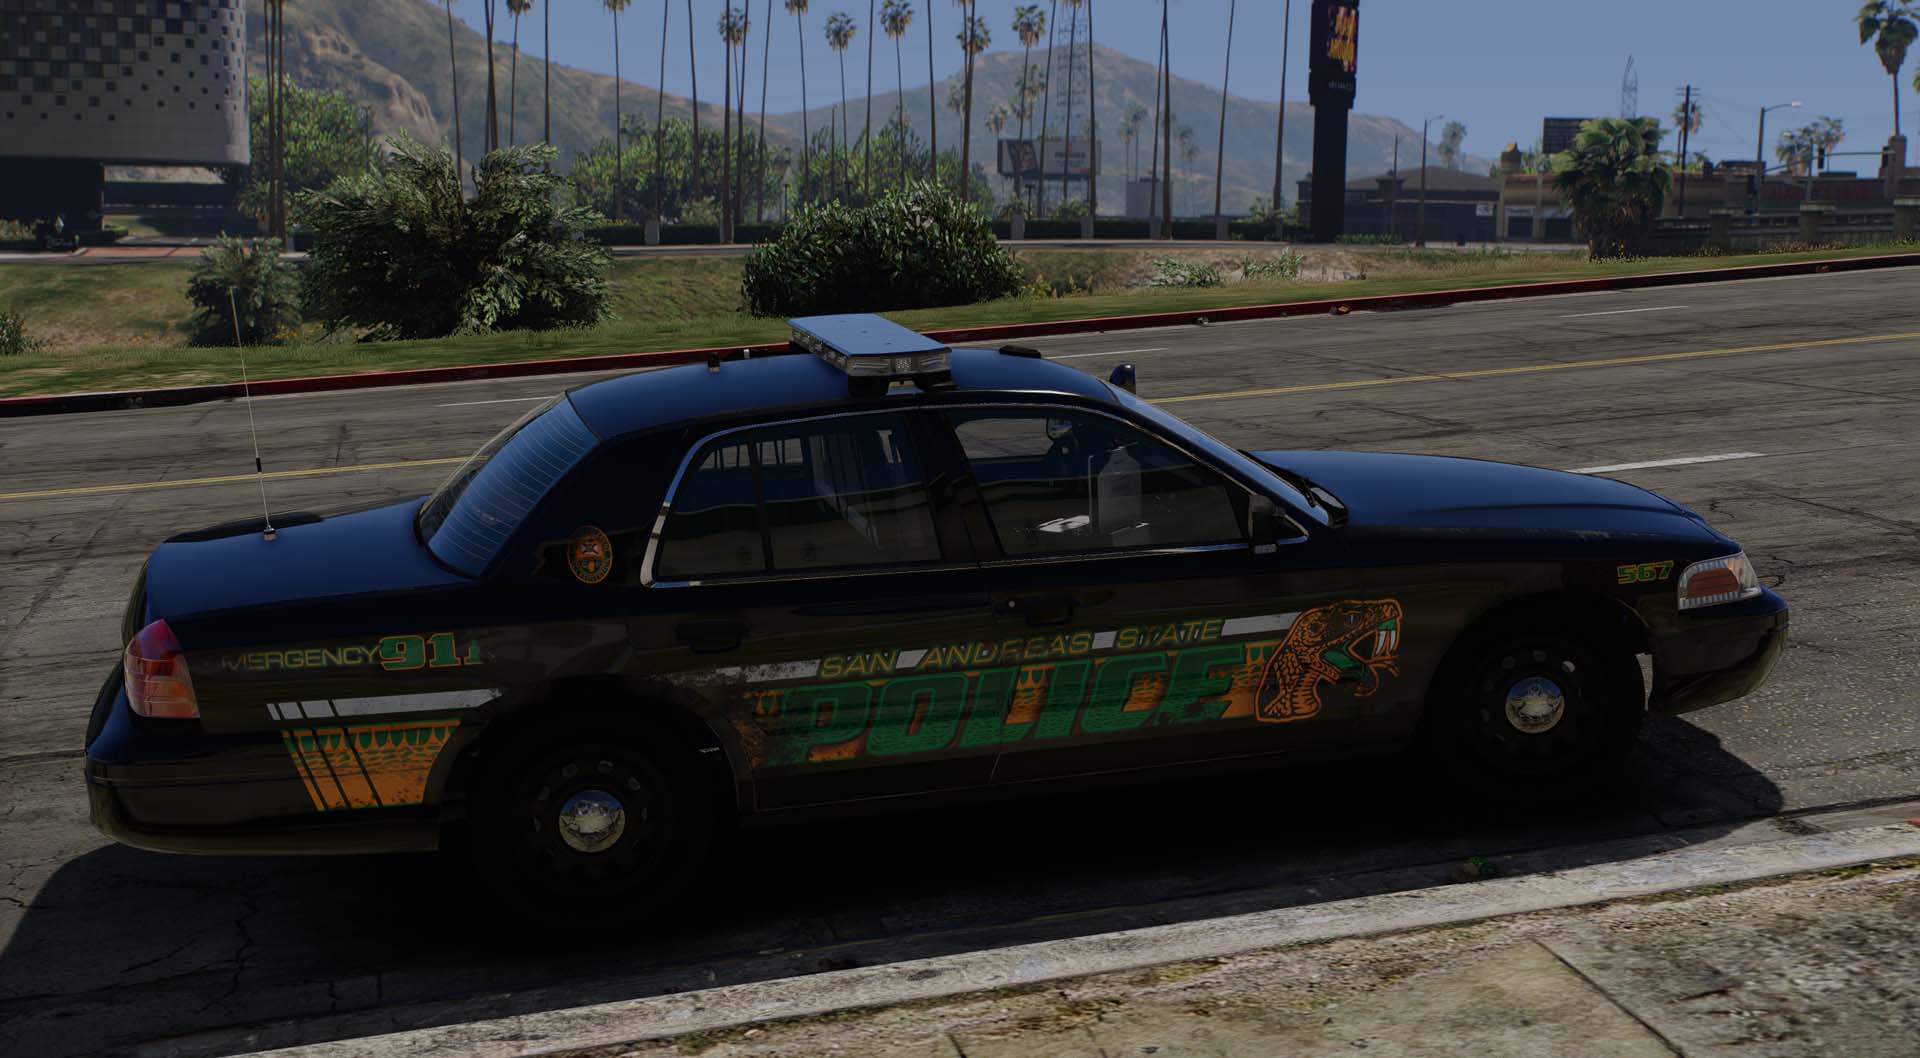 Swat & Canine police car - Car Livery by BasherDEE, Community